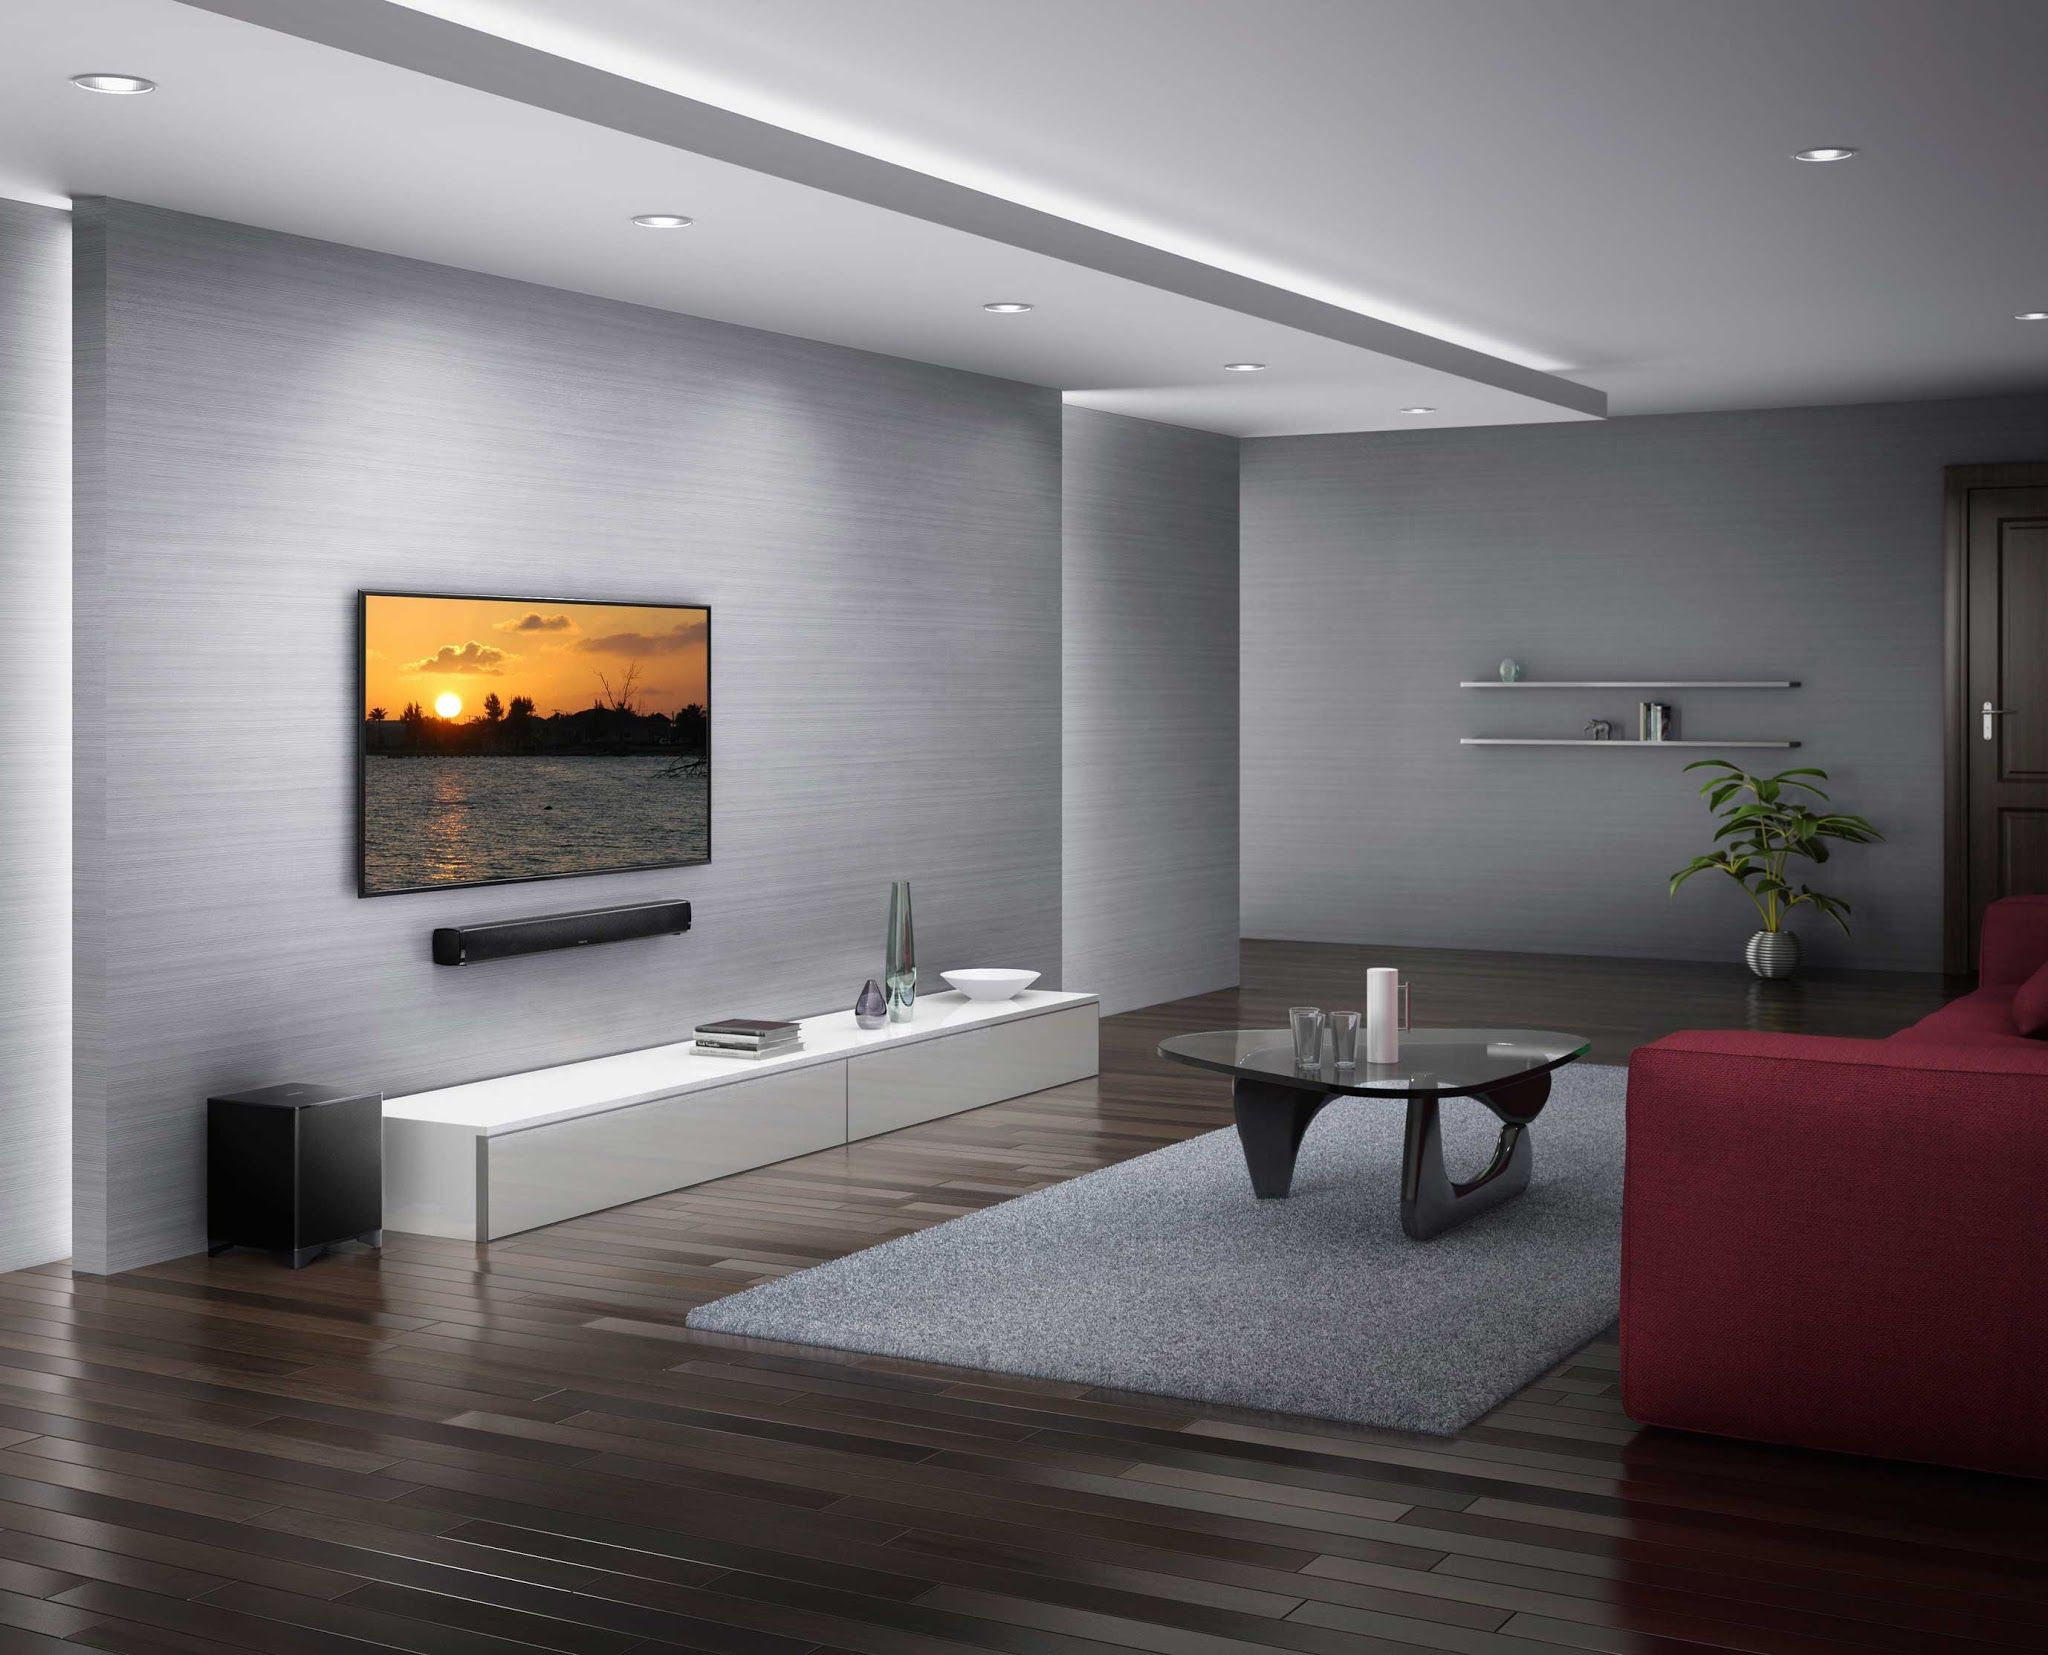 Iconic Home Theatre Packages From 5,999*